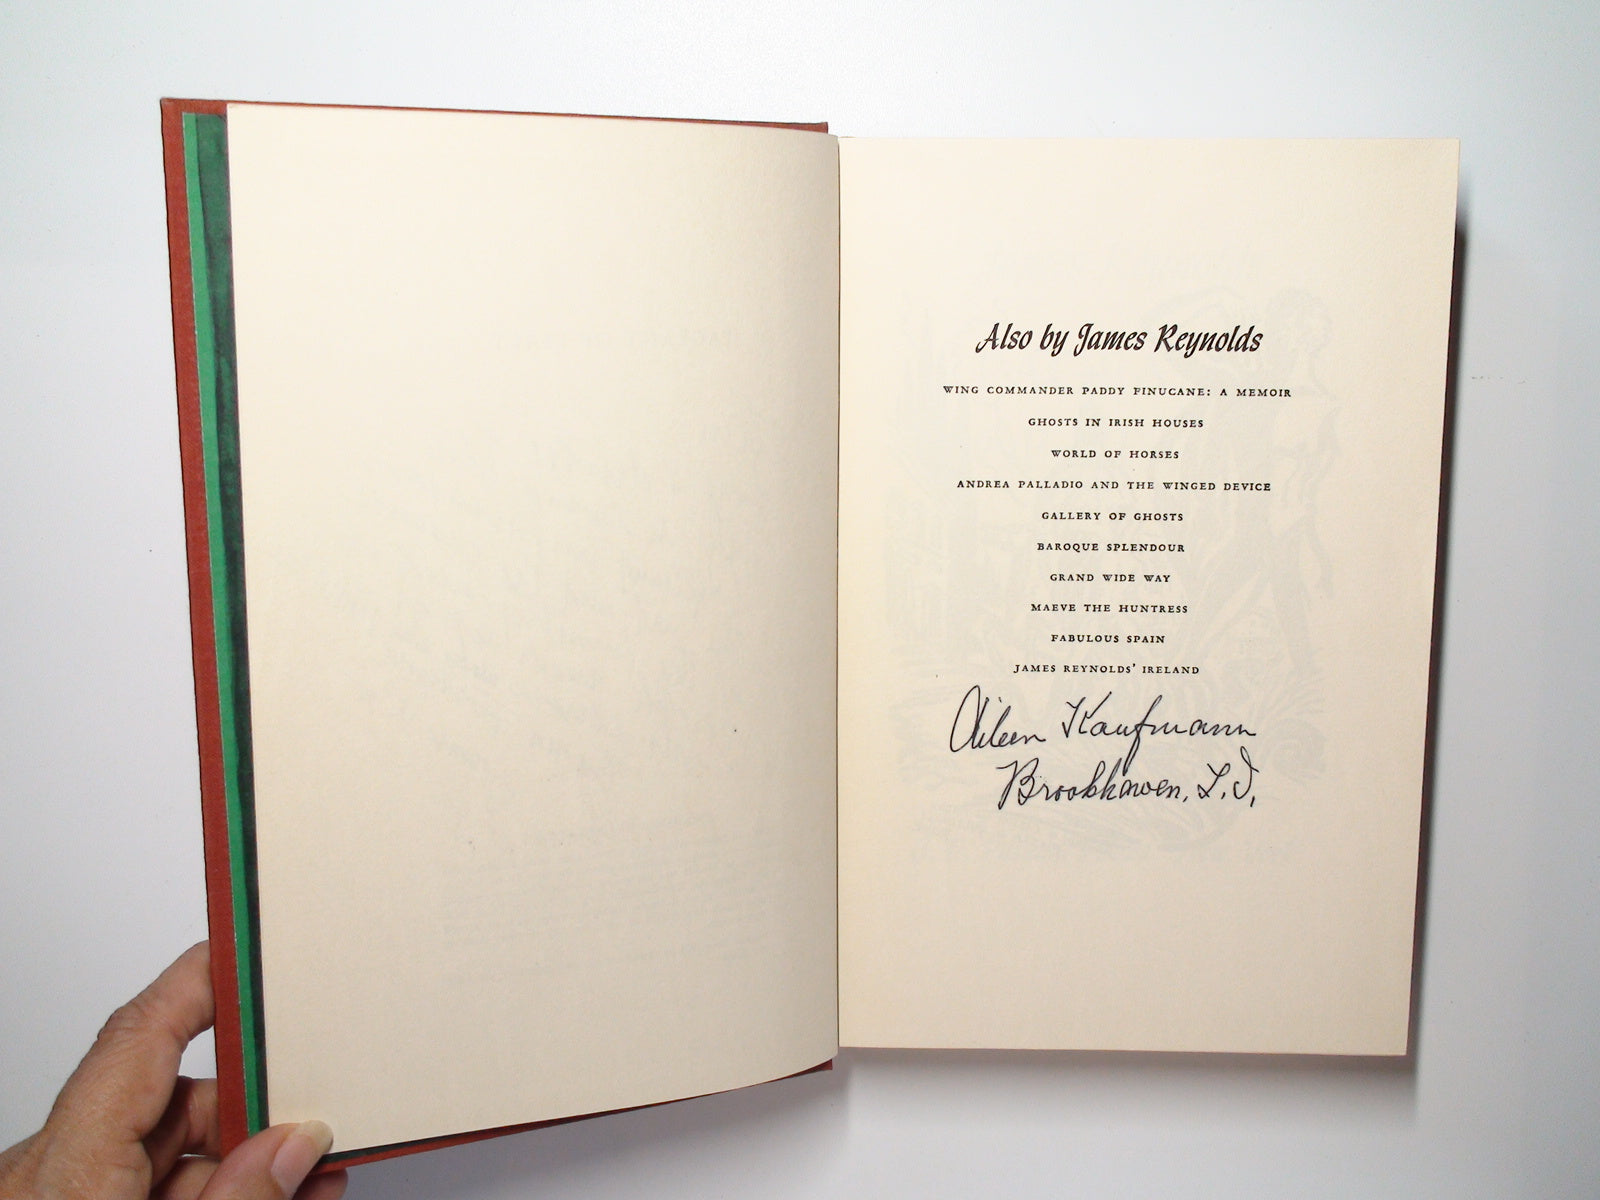 Pageant of Italy, SIGNED BY AUTHOR James Reynolds, Illustrated, 1st Ed, 1954